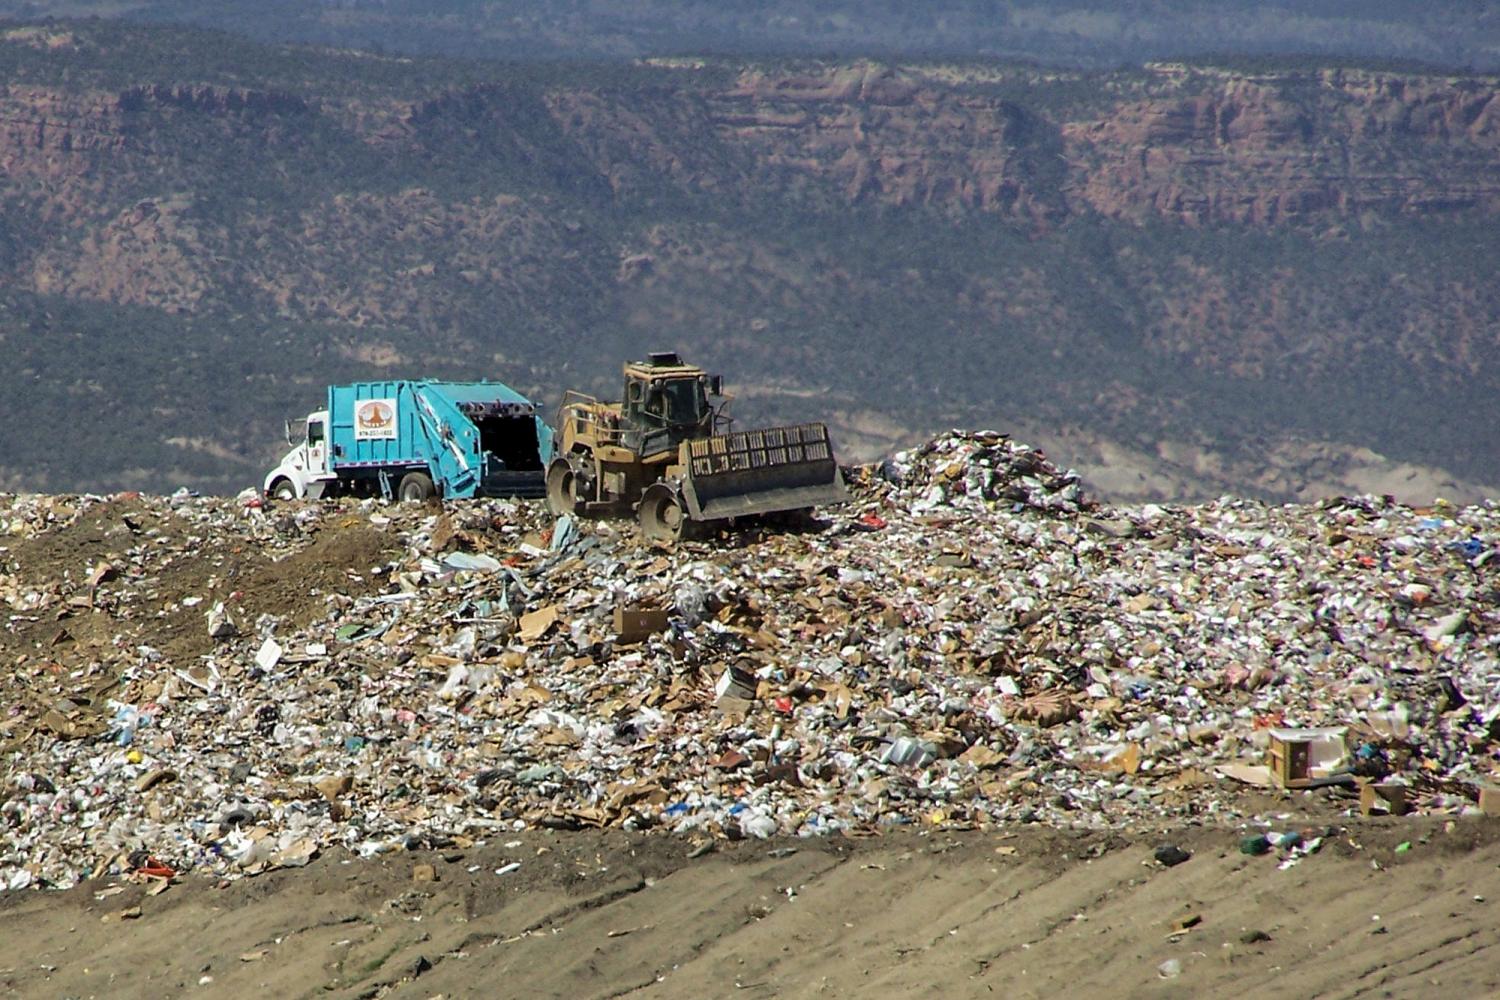 Landfill with tractors and dump truck